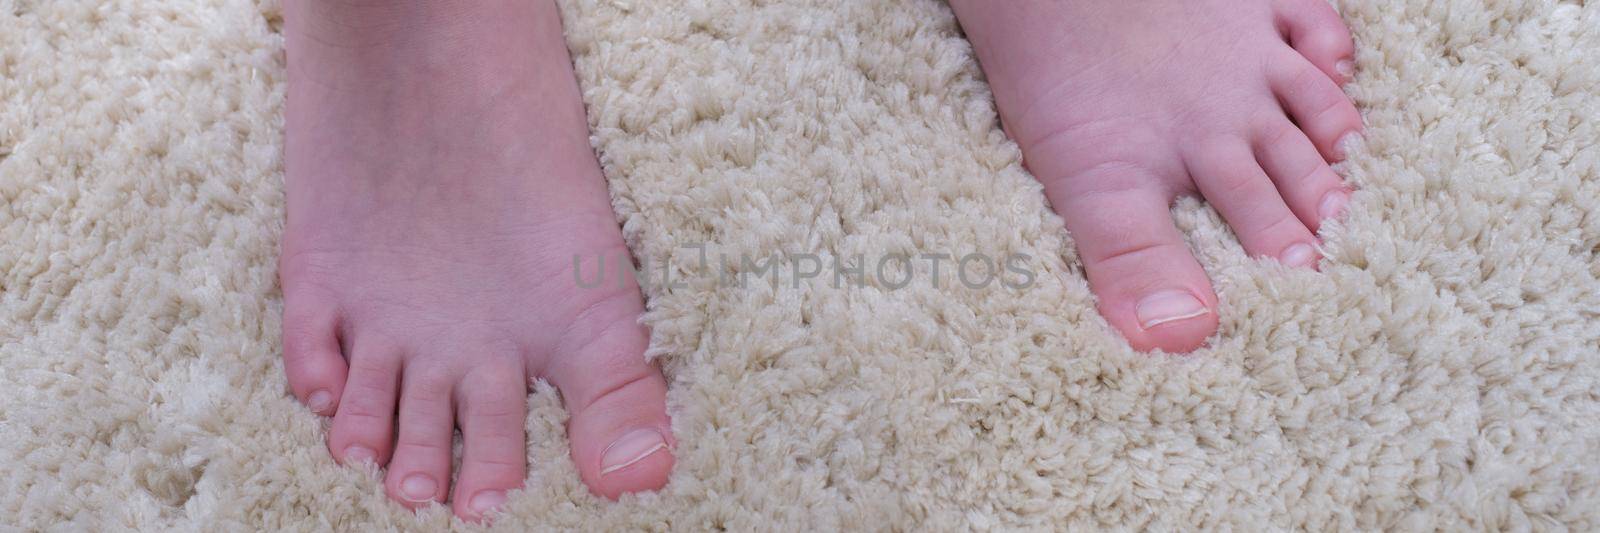 Bare feet of a man on a warm beige carpet, close-up. Soft pile carpet for an apartment. Noise isolation, foot massage